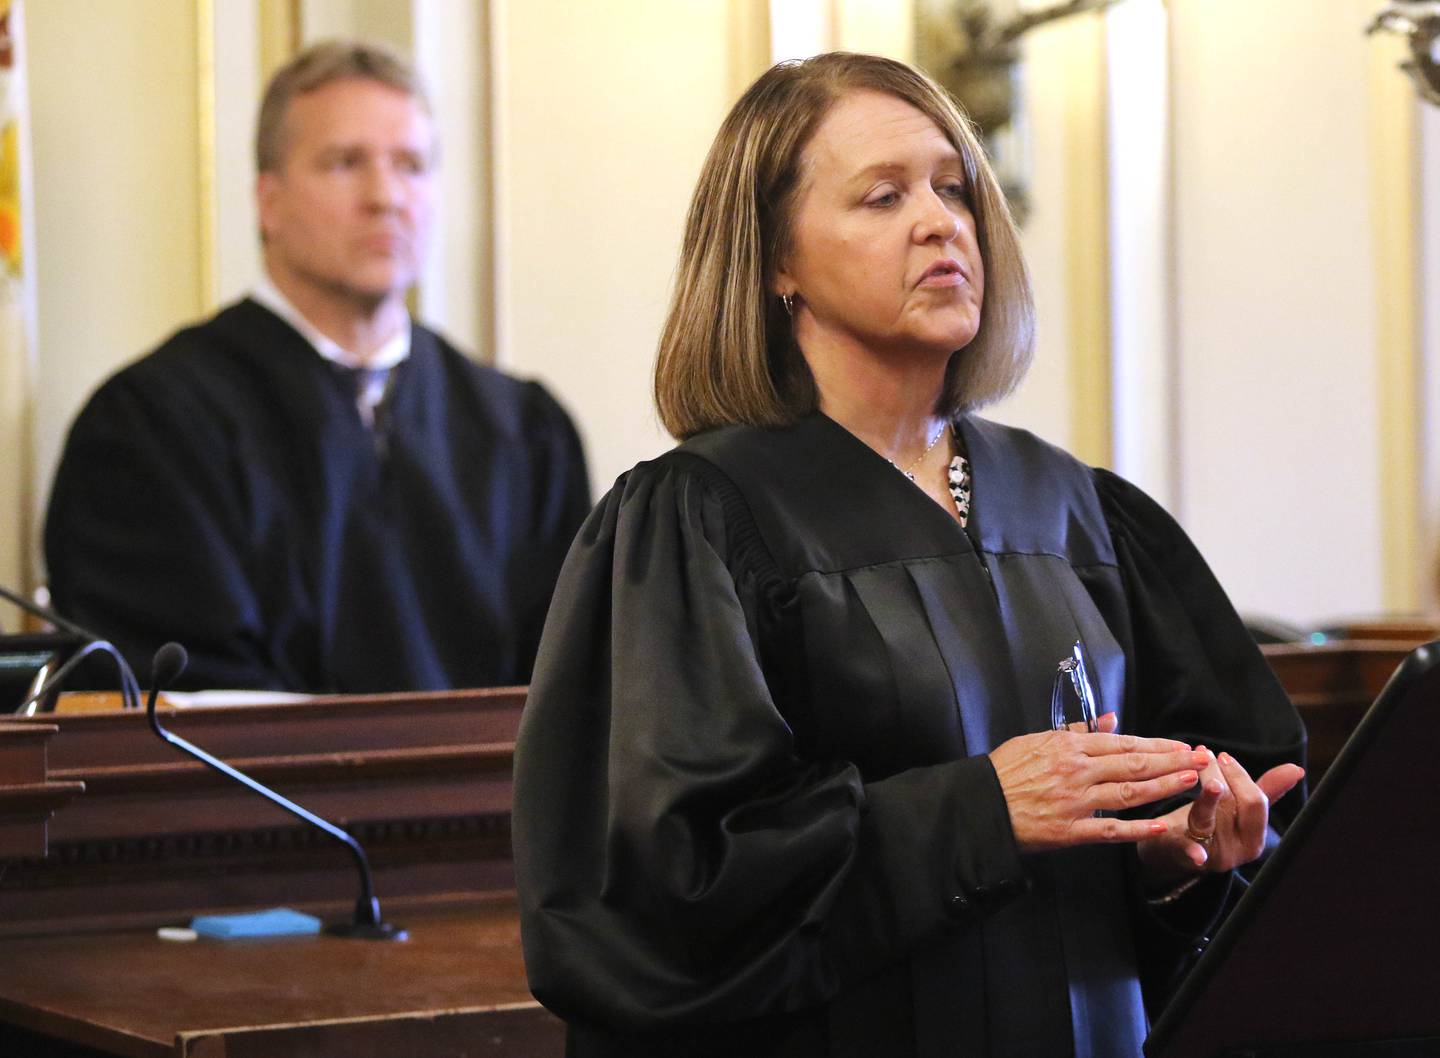 Judge Marcy Buick speaks after being sworn in as a Judge in the 23rd Judicial Circuit Court Friday in Courtroom 300 at the DeKalb County Courthouse. Buick is filling the void left when Judge Robbin Stuckert retired.